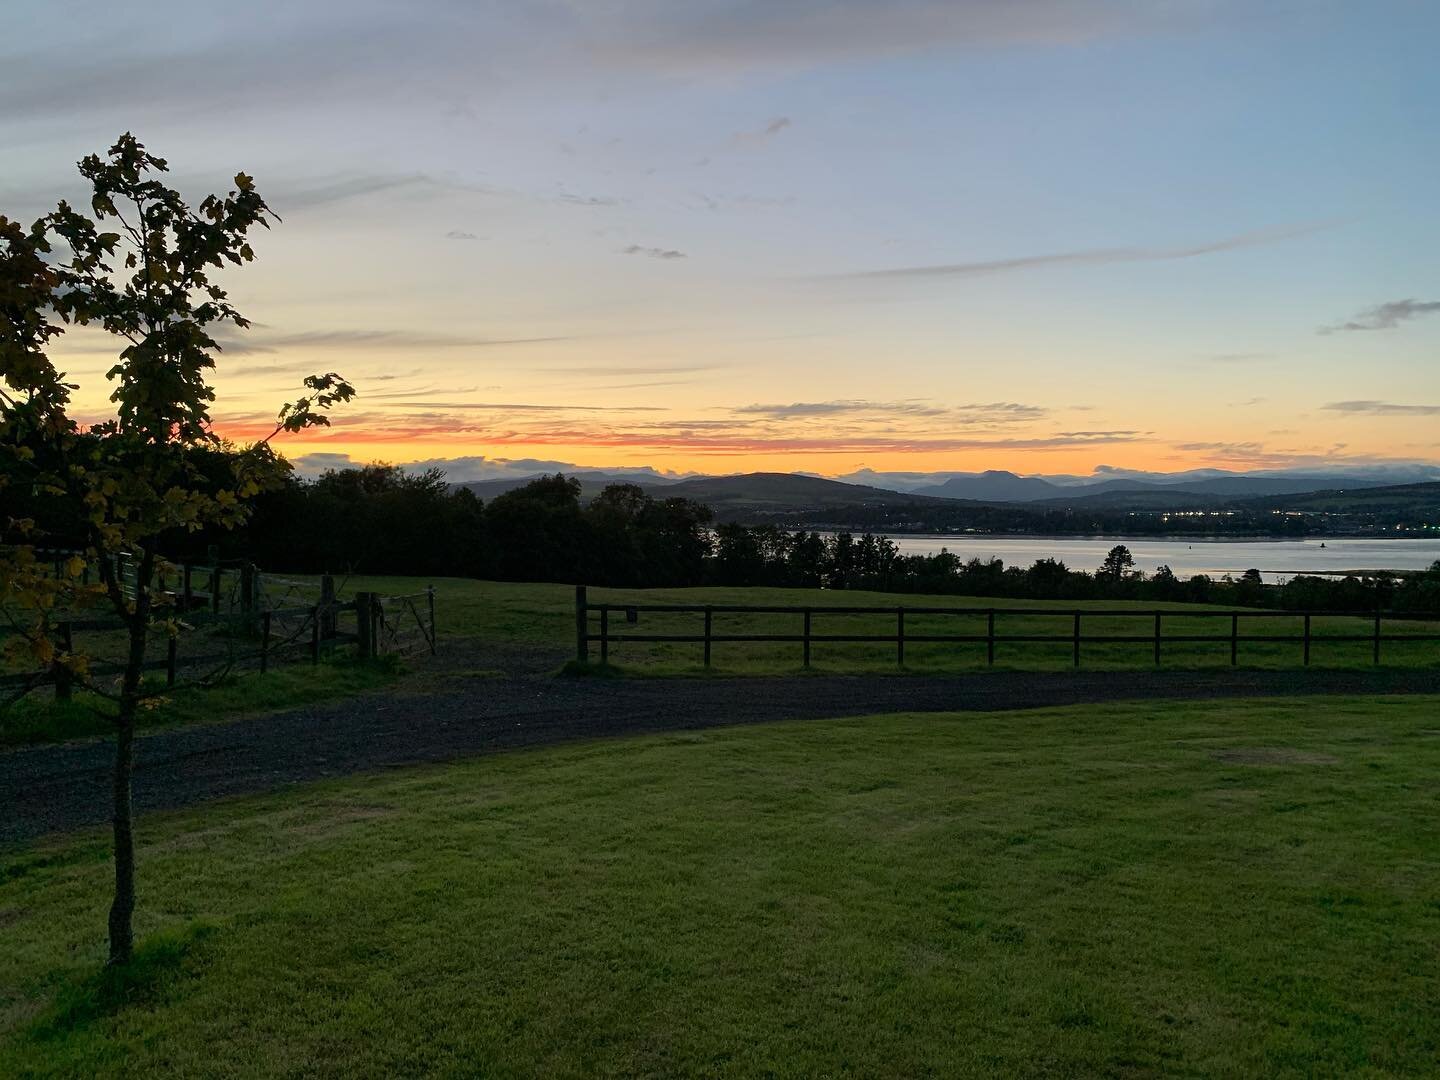 That&rsquo;s the last handover of the day complete, the clients driving off in to the sunset to explore Scotland, first stop at a site by Loch Lomond.
We can always offer flexible collection times, so if your arriving on an evening flight, just let u